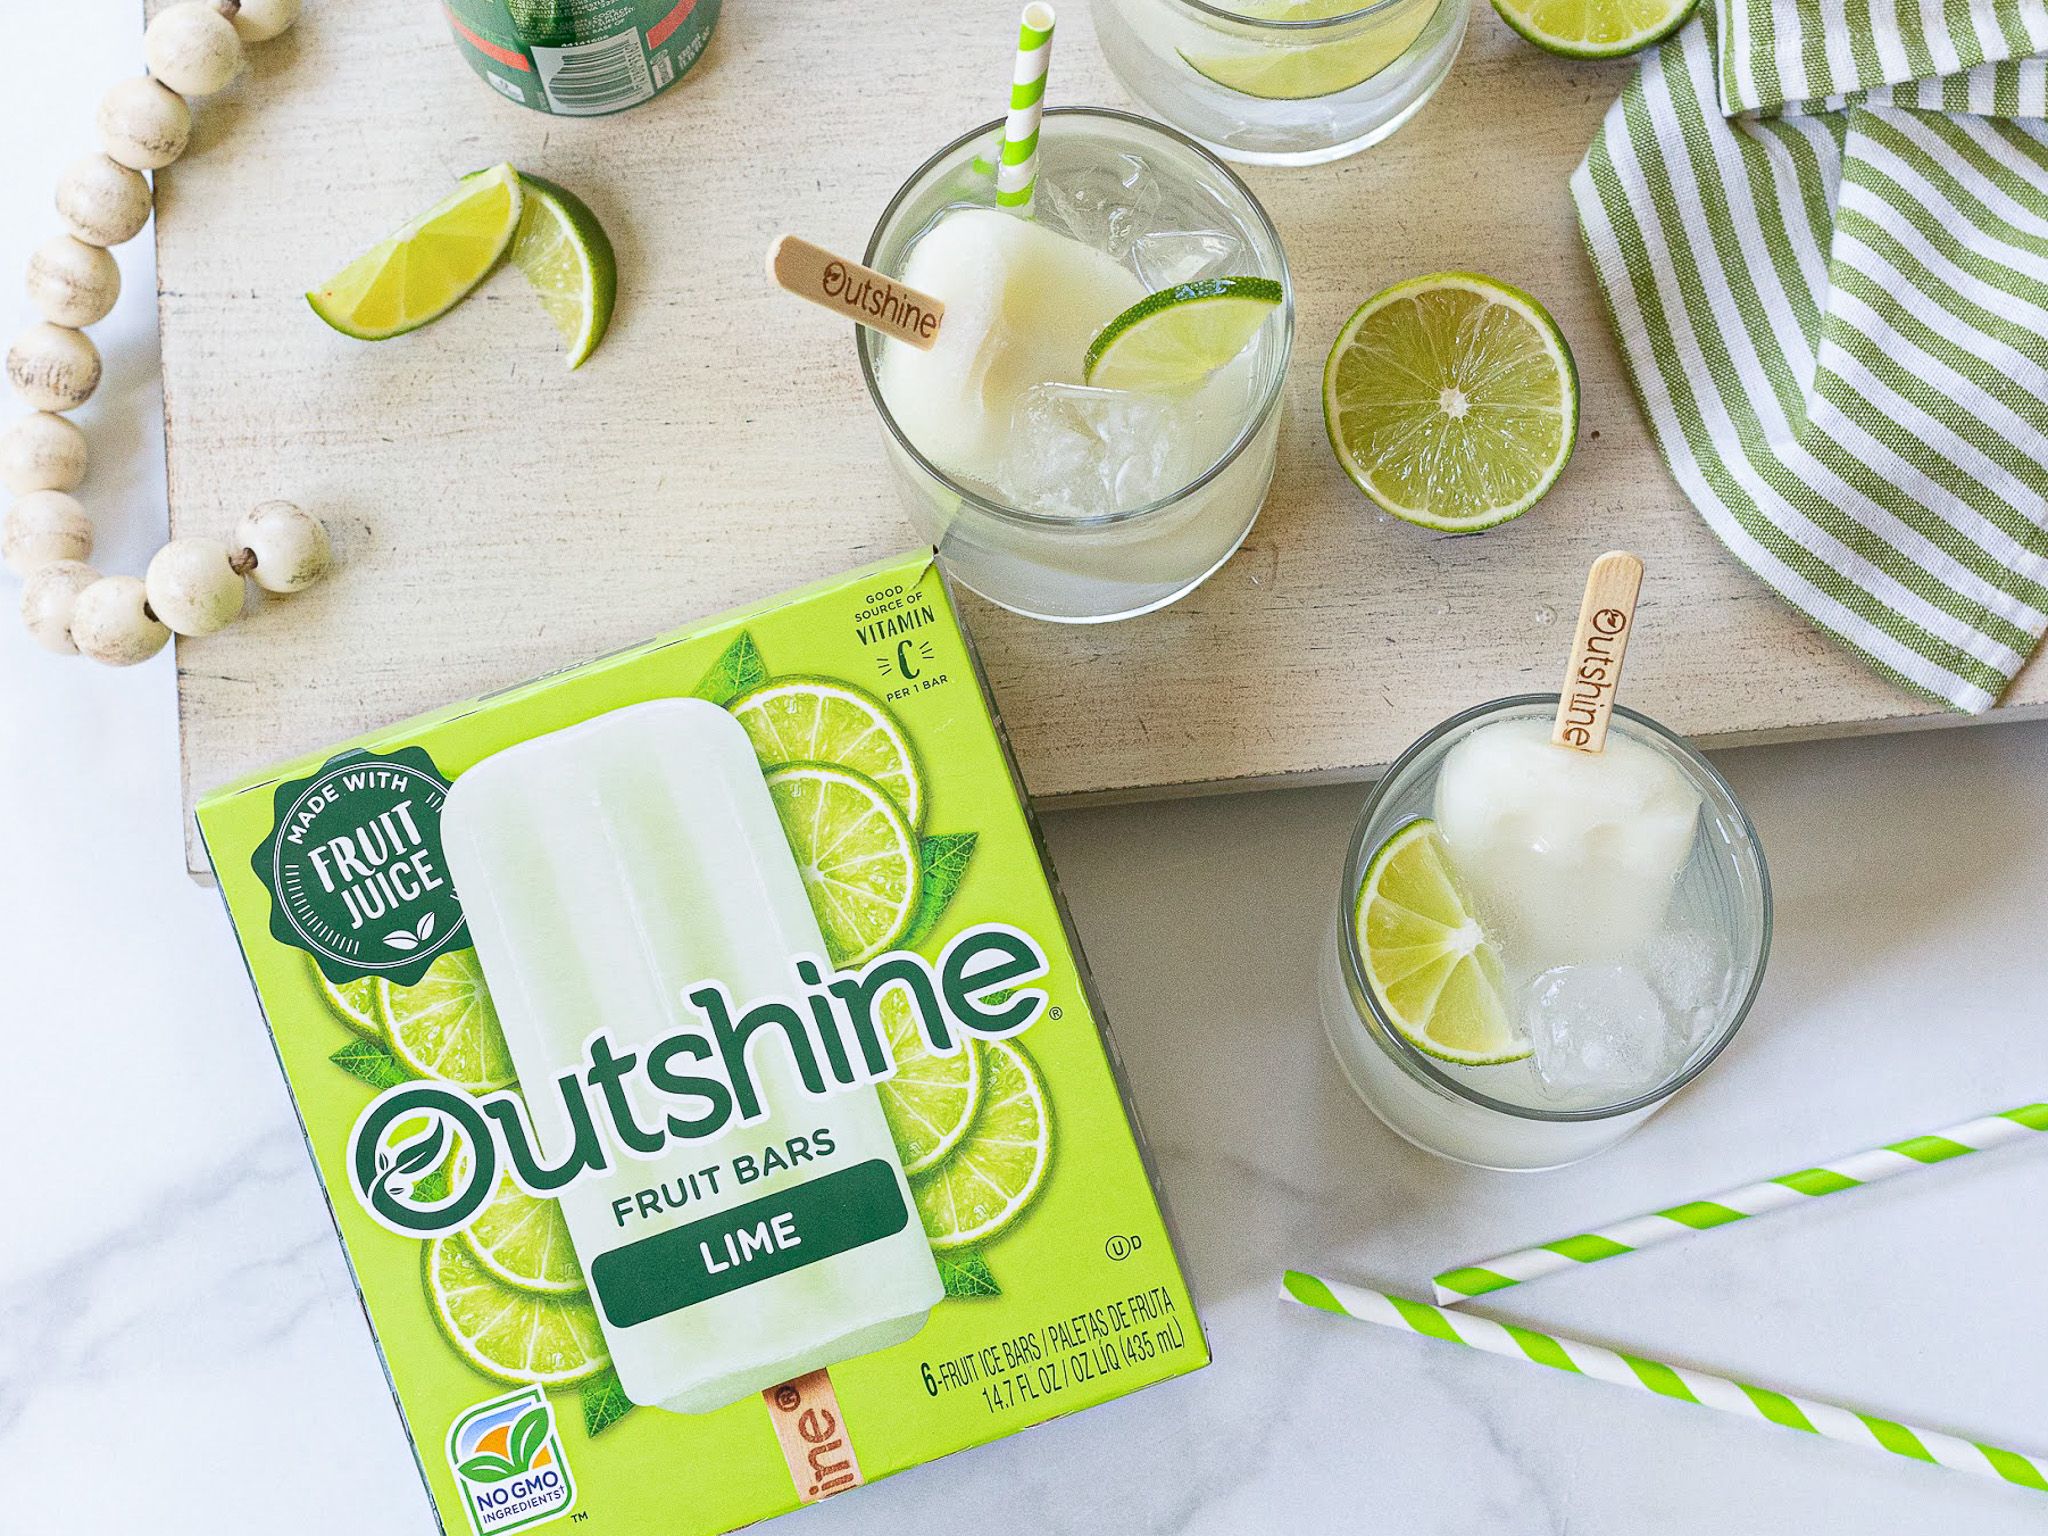 Stock Your Freezer With Delicious & Refreshing Outshine Fruit Bars – BOGO Sale NOW At Publix